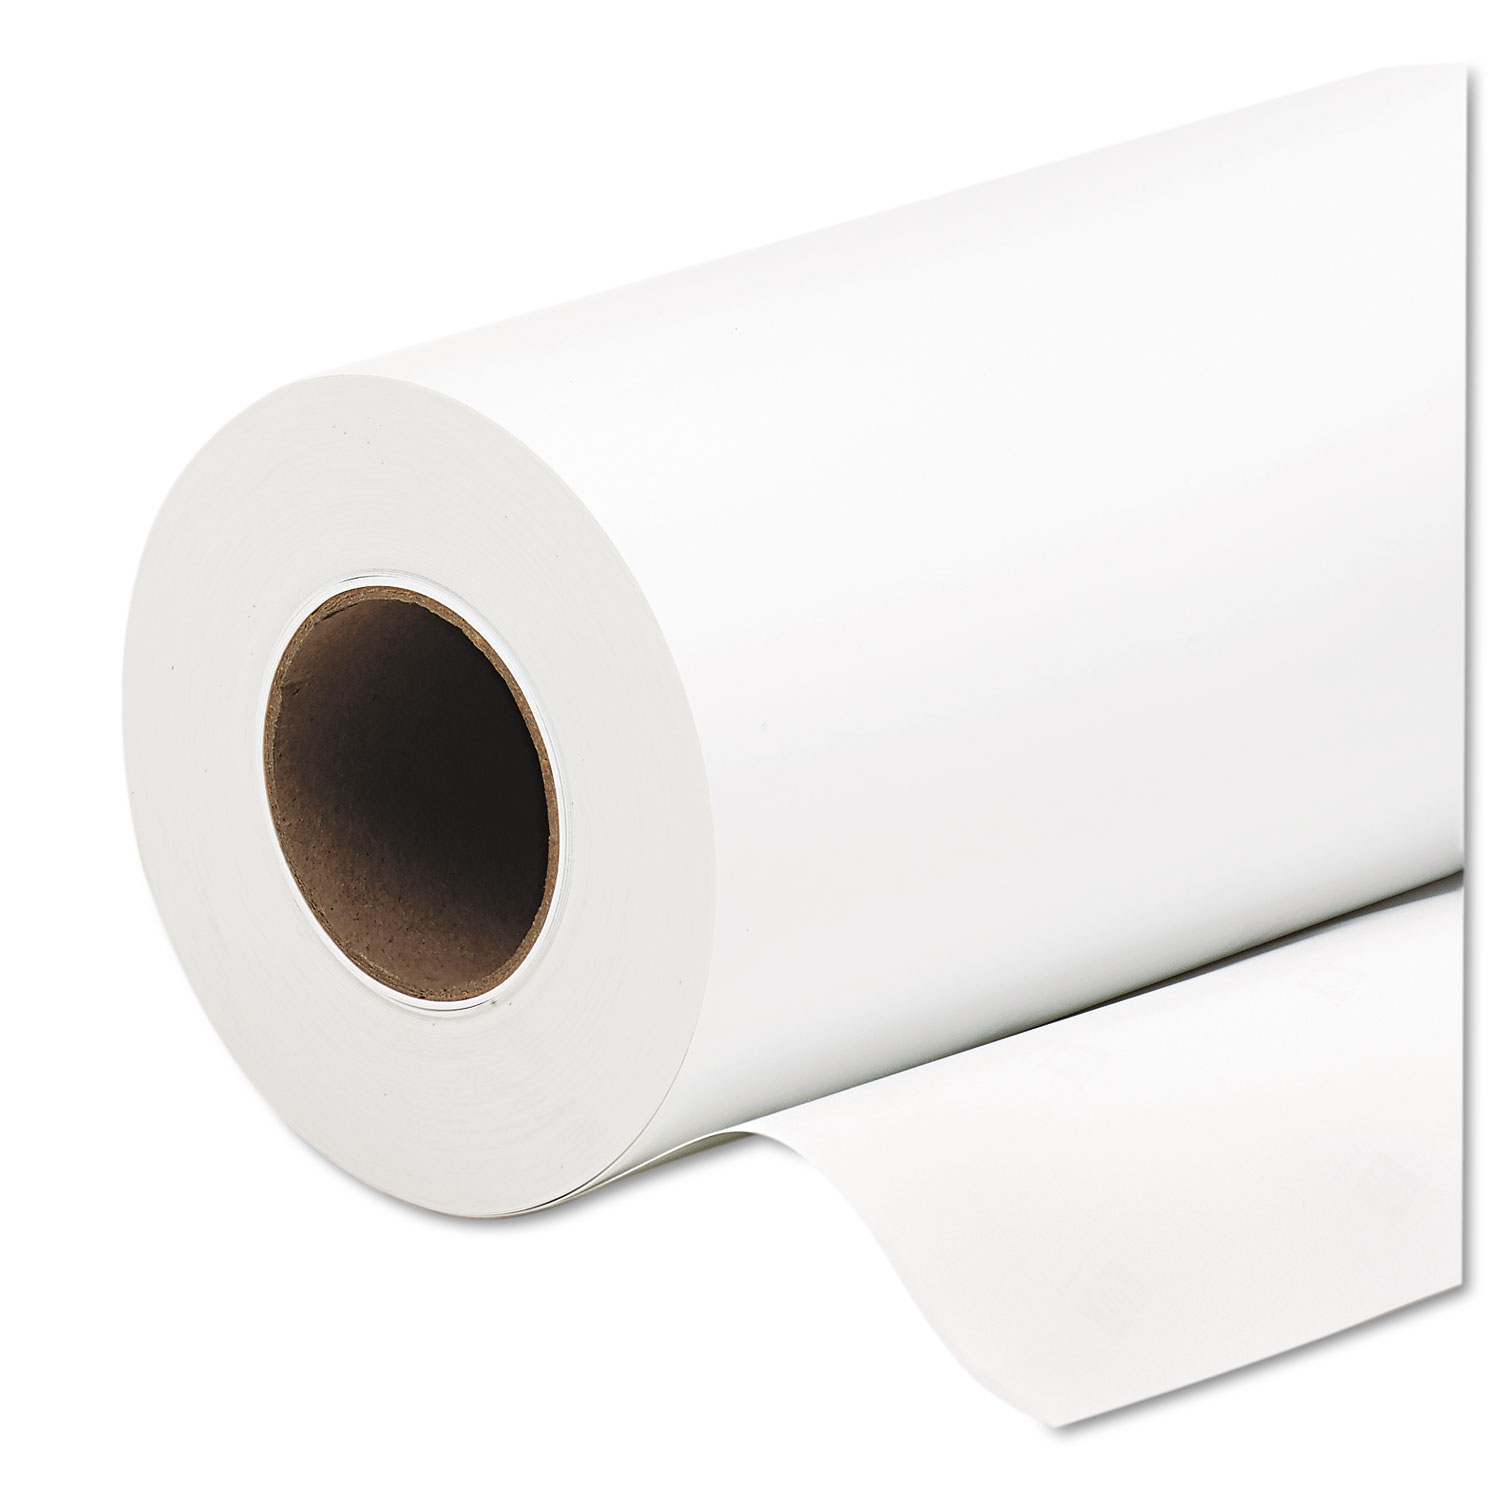  HP Q8922A Everyday Pigment Ink Photo Paper Roll, 9.1 mil, 42 x 100 ft, Satin White (HEWQ8922A) 